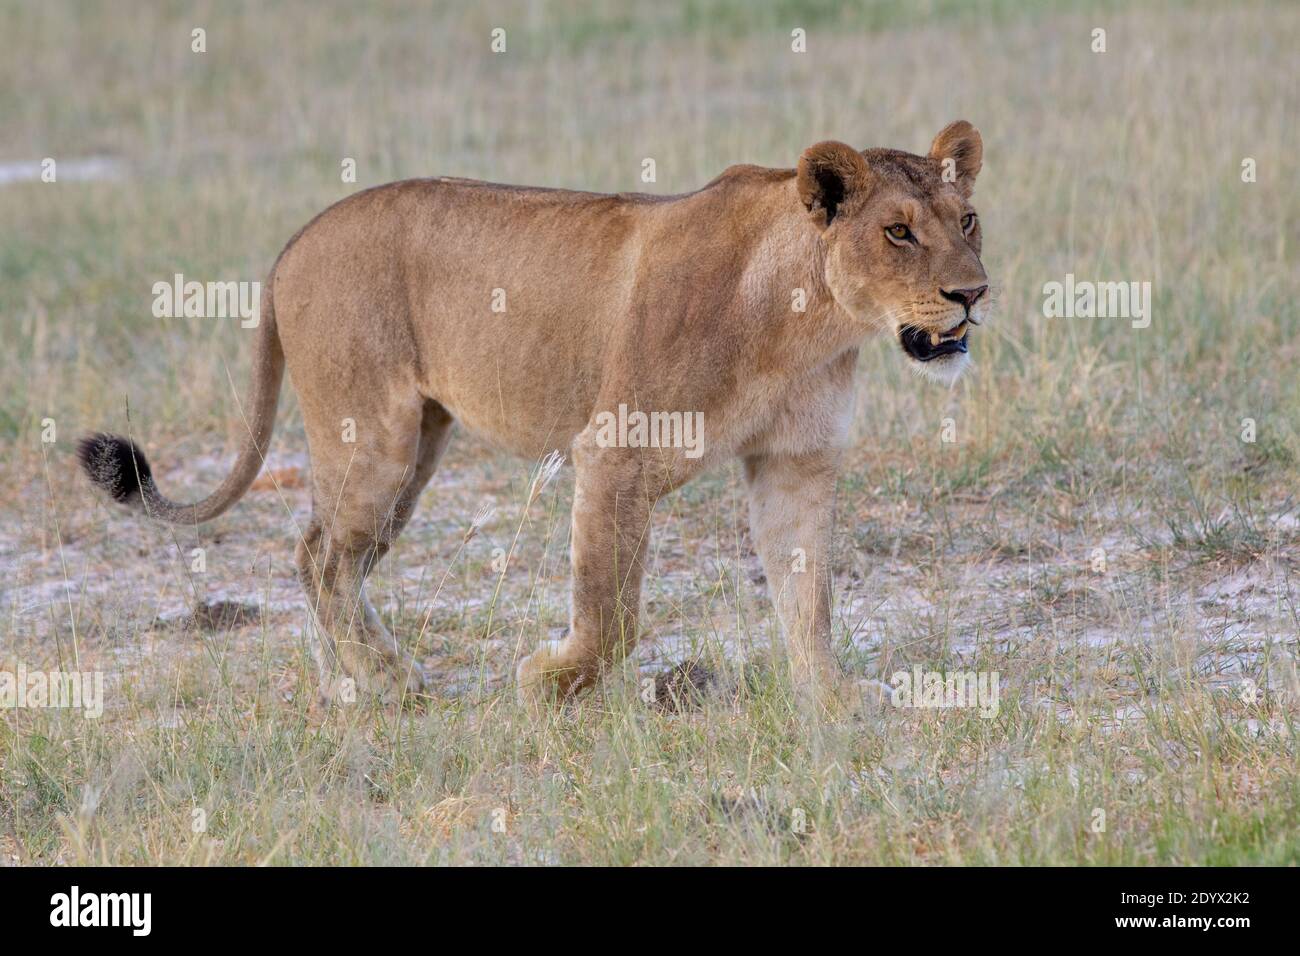 African Lioness (Panthera leo). In peak of, near perfect, physical condition, towards the end of the rainy season. Botswana. February. Stock Photo